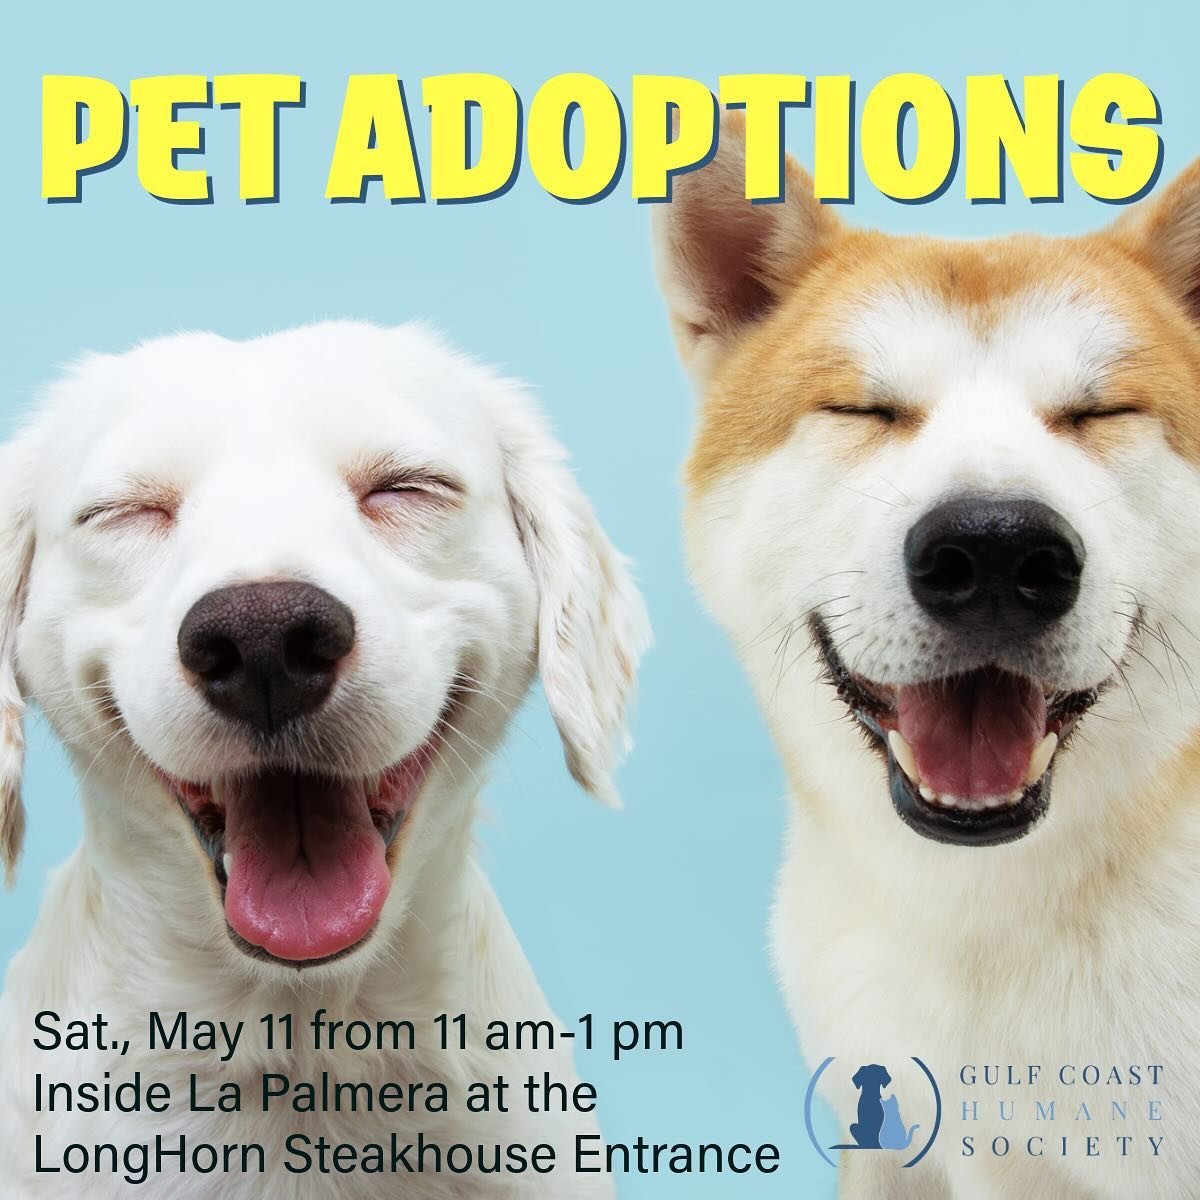 May is National Pet Month and La Palmera is celebrating! Gulf Coast Humane Society will be on-site near our new Pooch Wall with pet adoptions from 11 a.m.&ndash;1 p.m.

Our new Pooch Wall mural, featuring more than 500 local canine candids submitted 